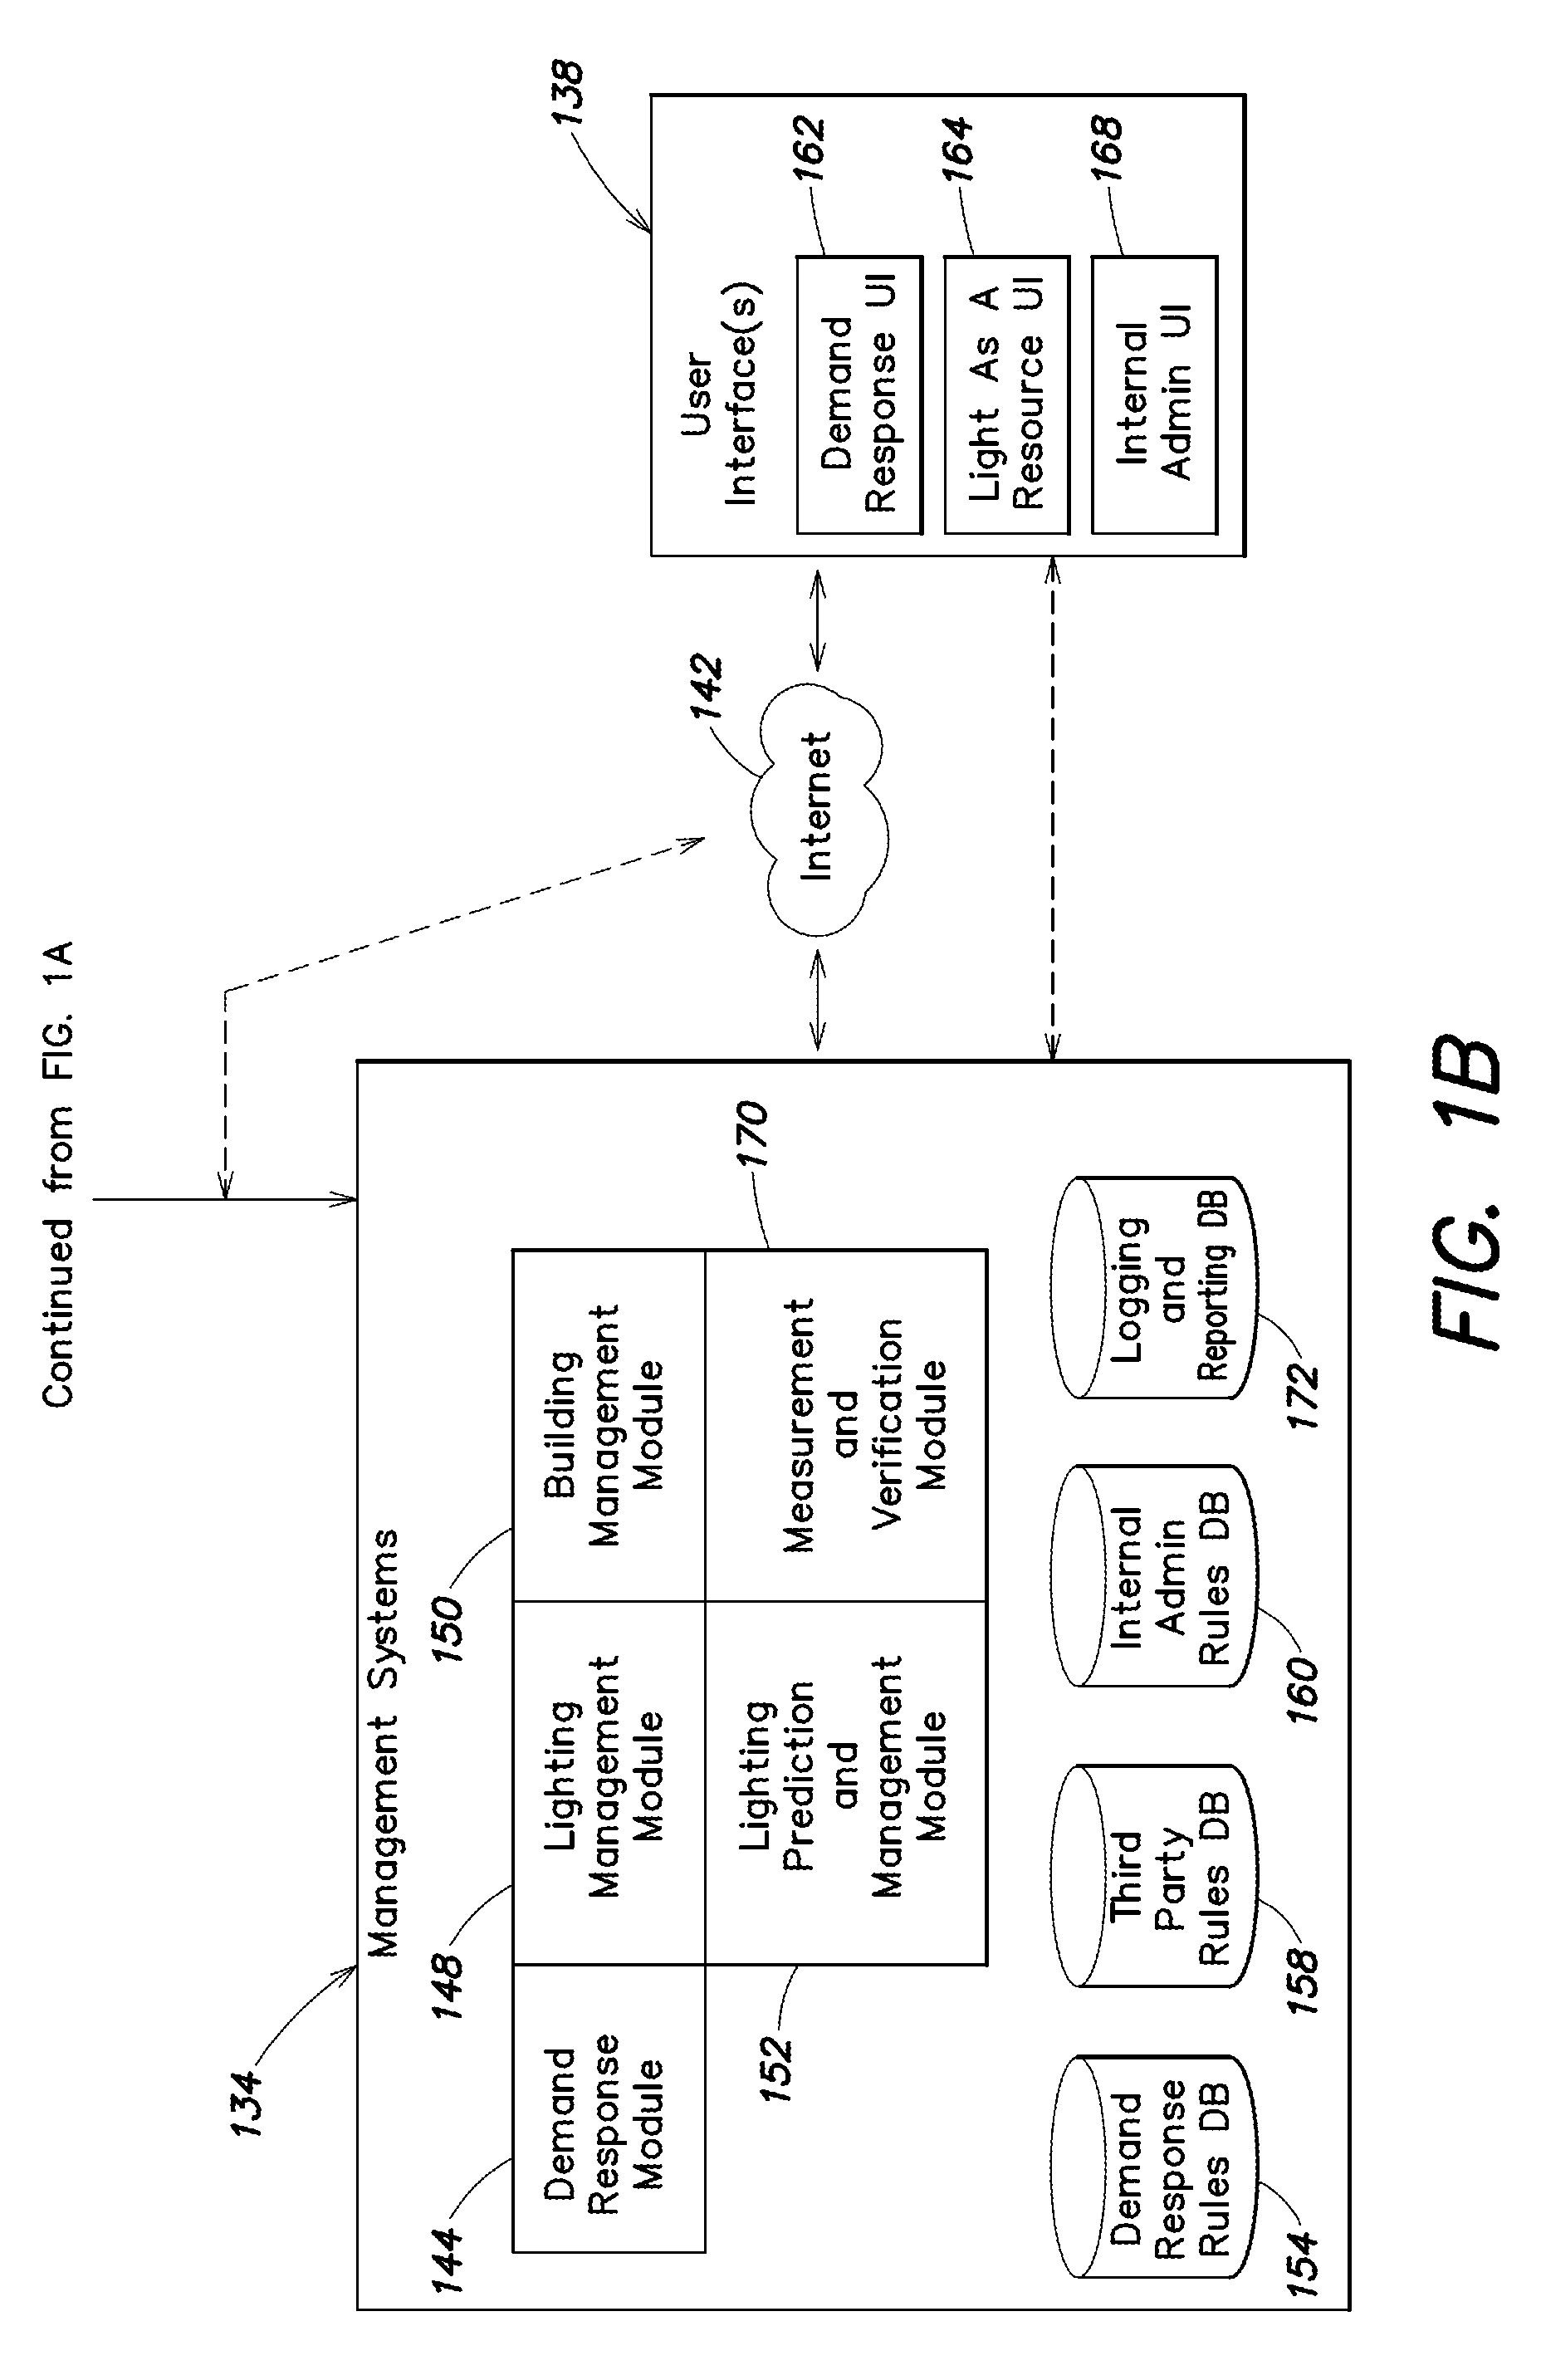 Methods, apparatus, and systems for automatic power adjustment based on energy demand information